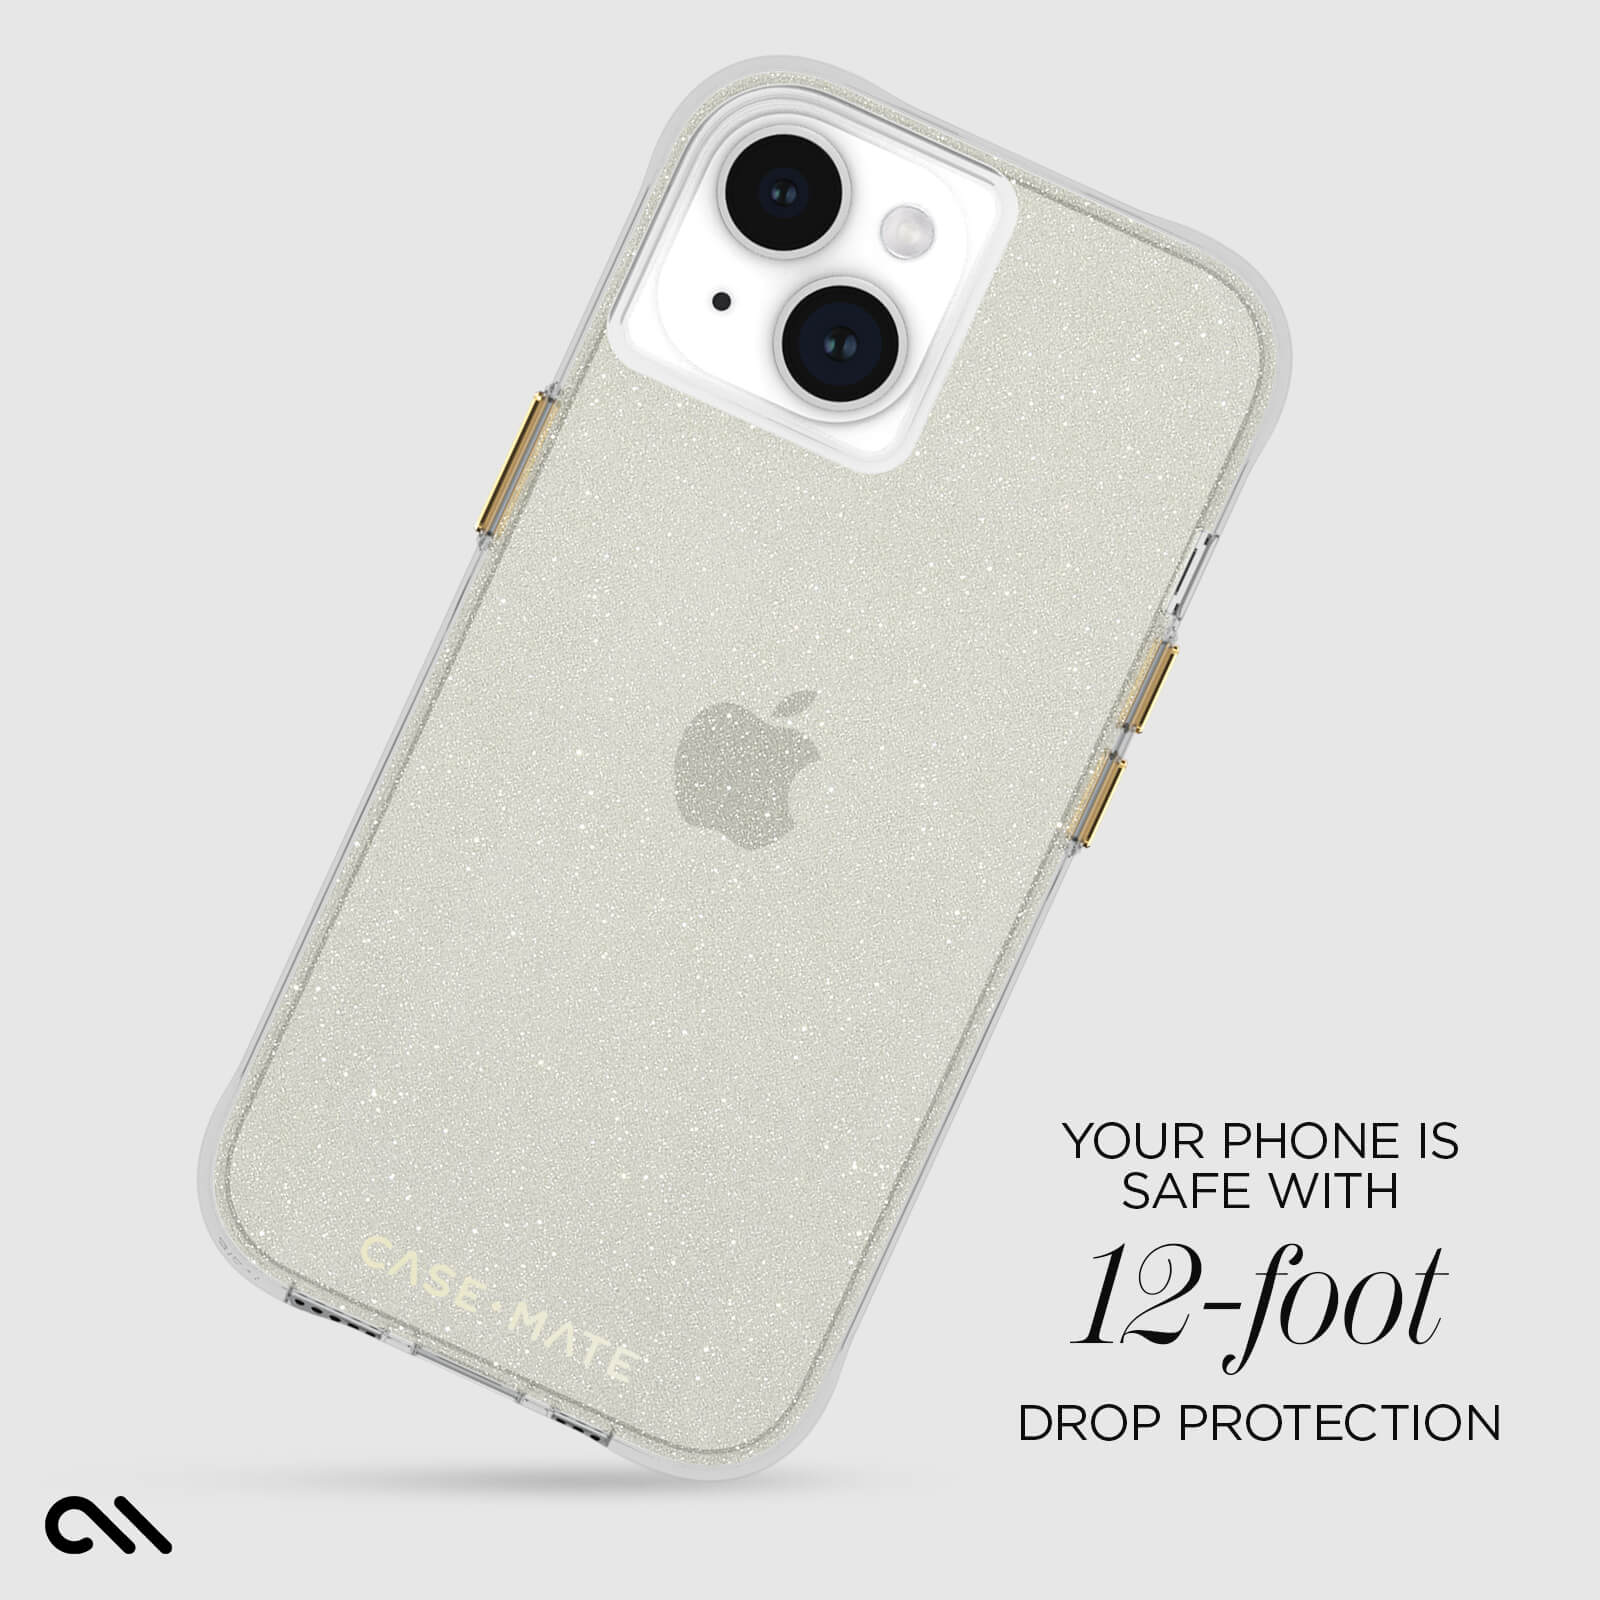 YOUR PHONE IS SAFE WITH 12-FOOT DROP PROTECTIN